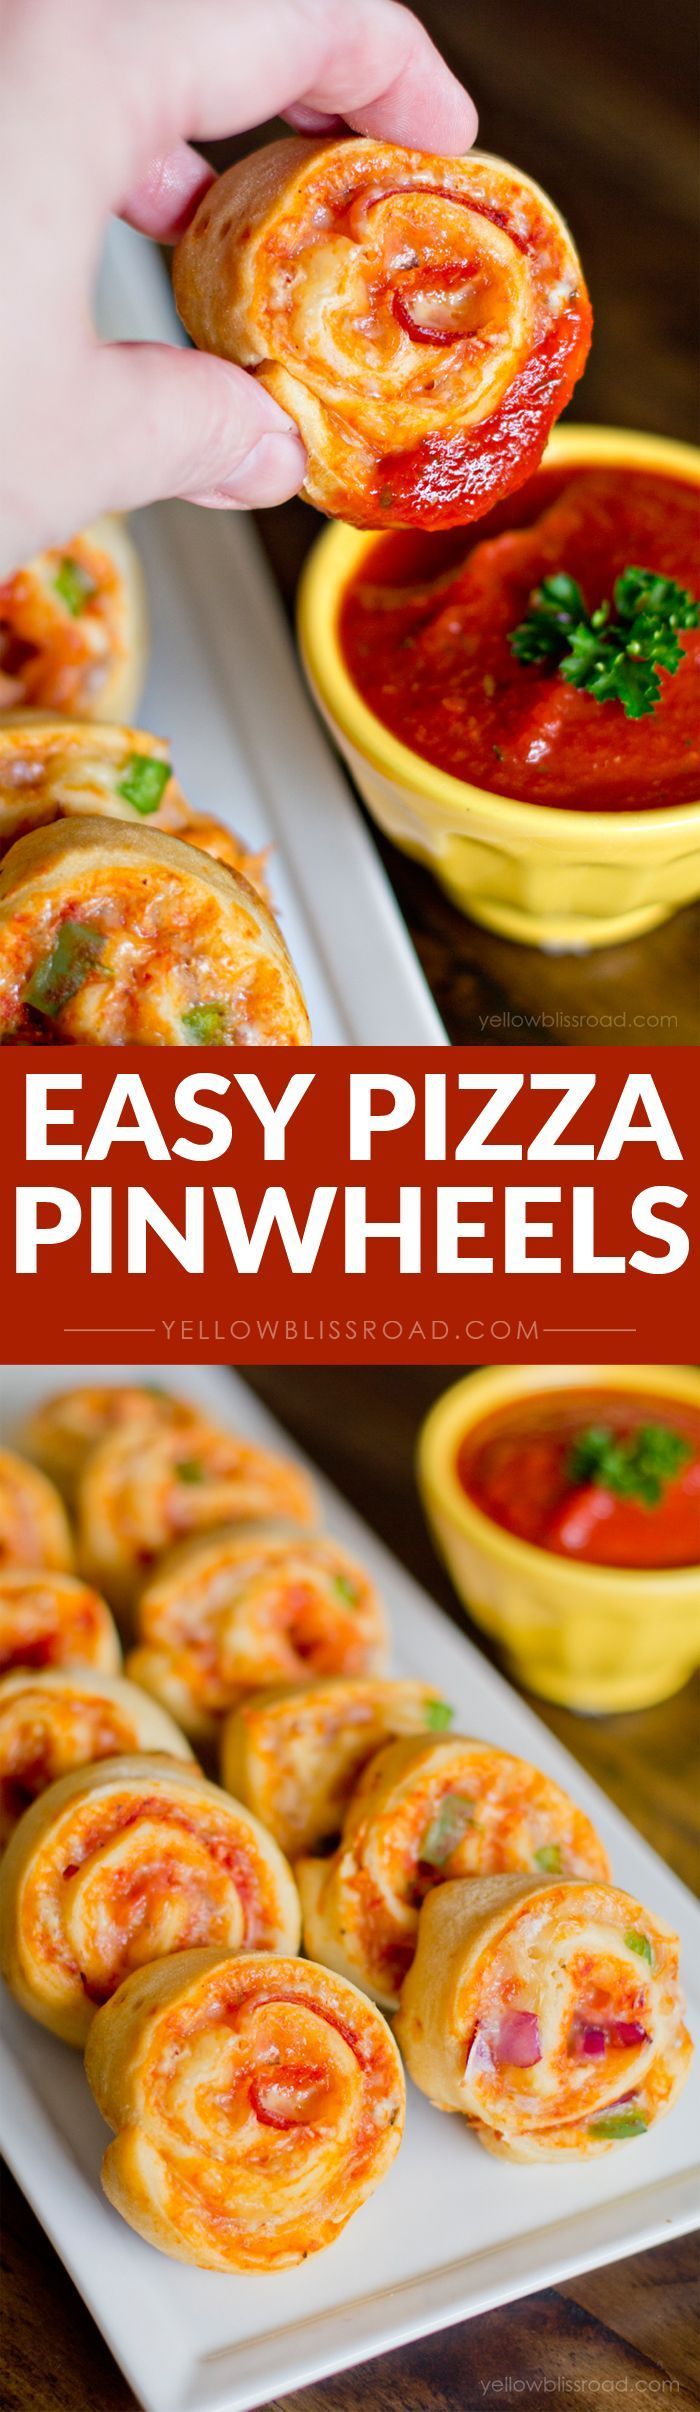 Easy Pizza Pinwheels – A fun snack and the perfect finger food!